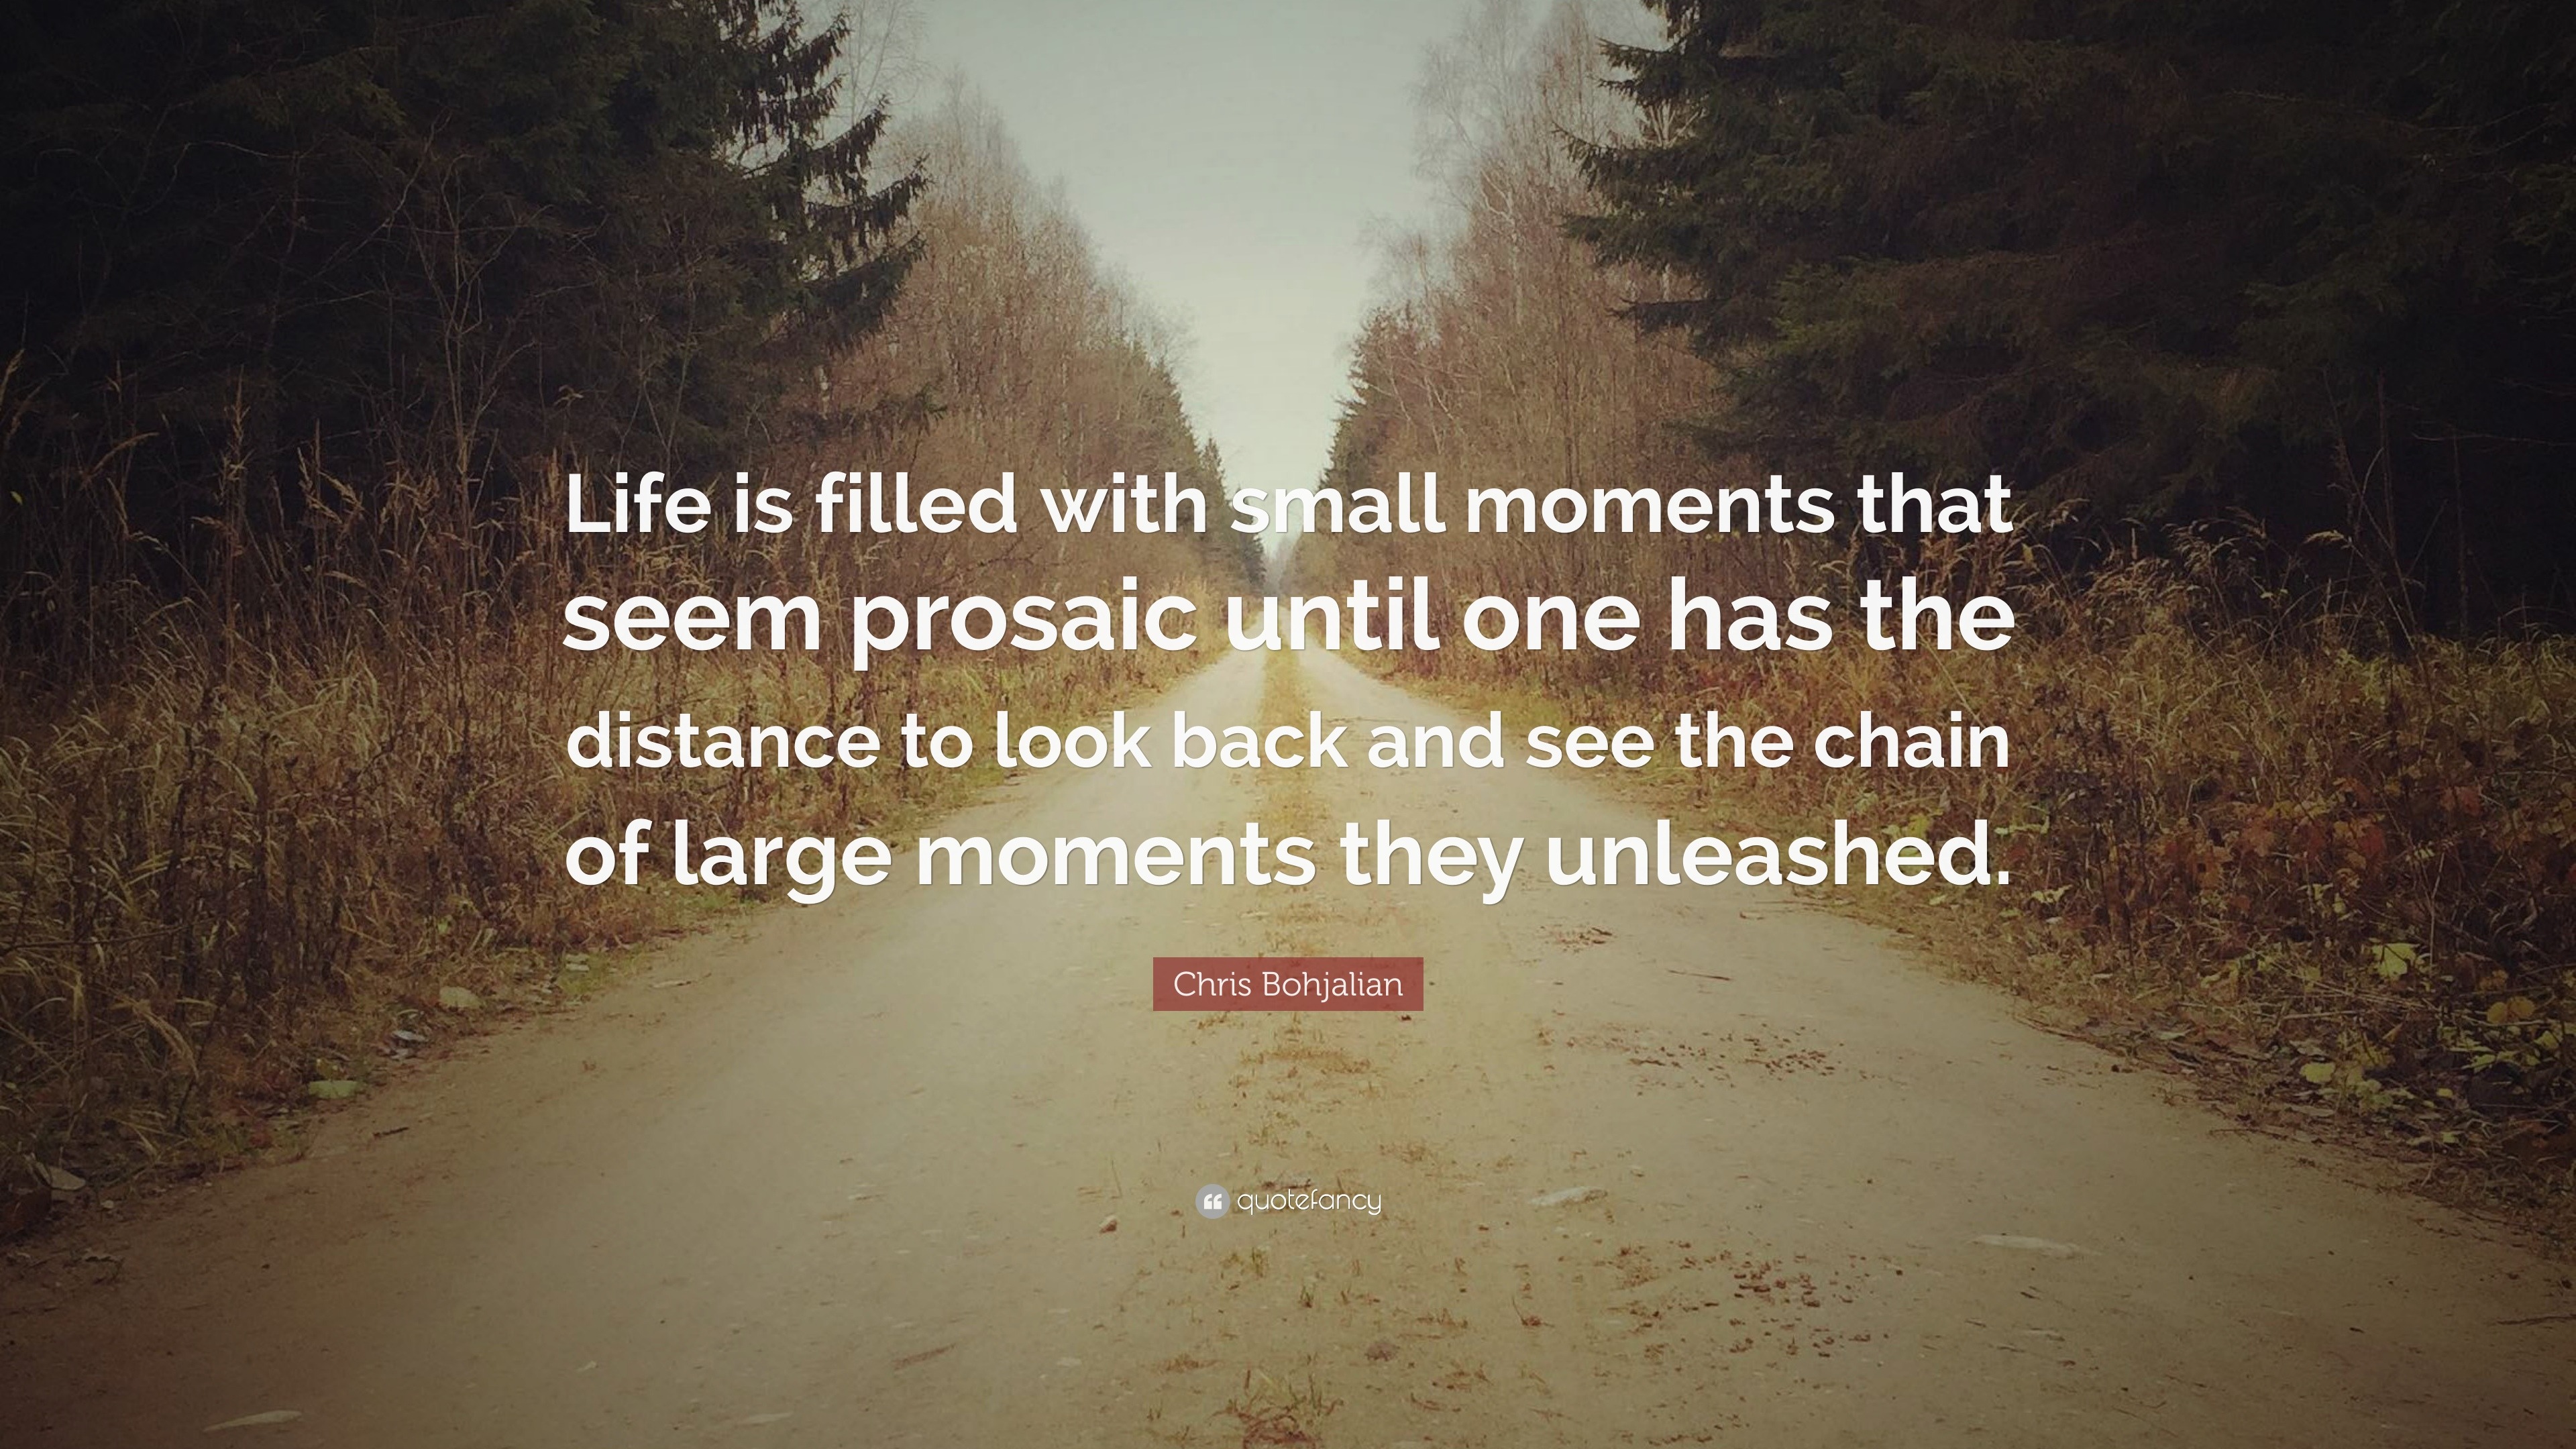 Chris Bohjalian Quote: “Life is filled with small moments that seem ...